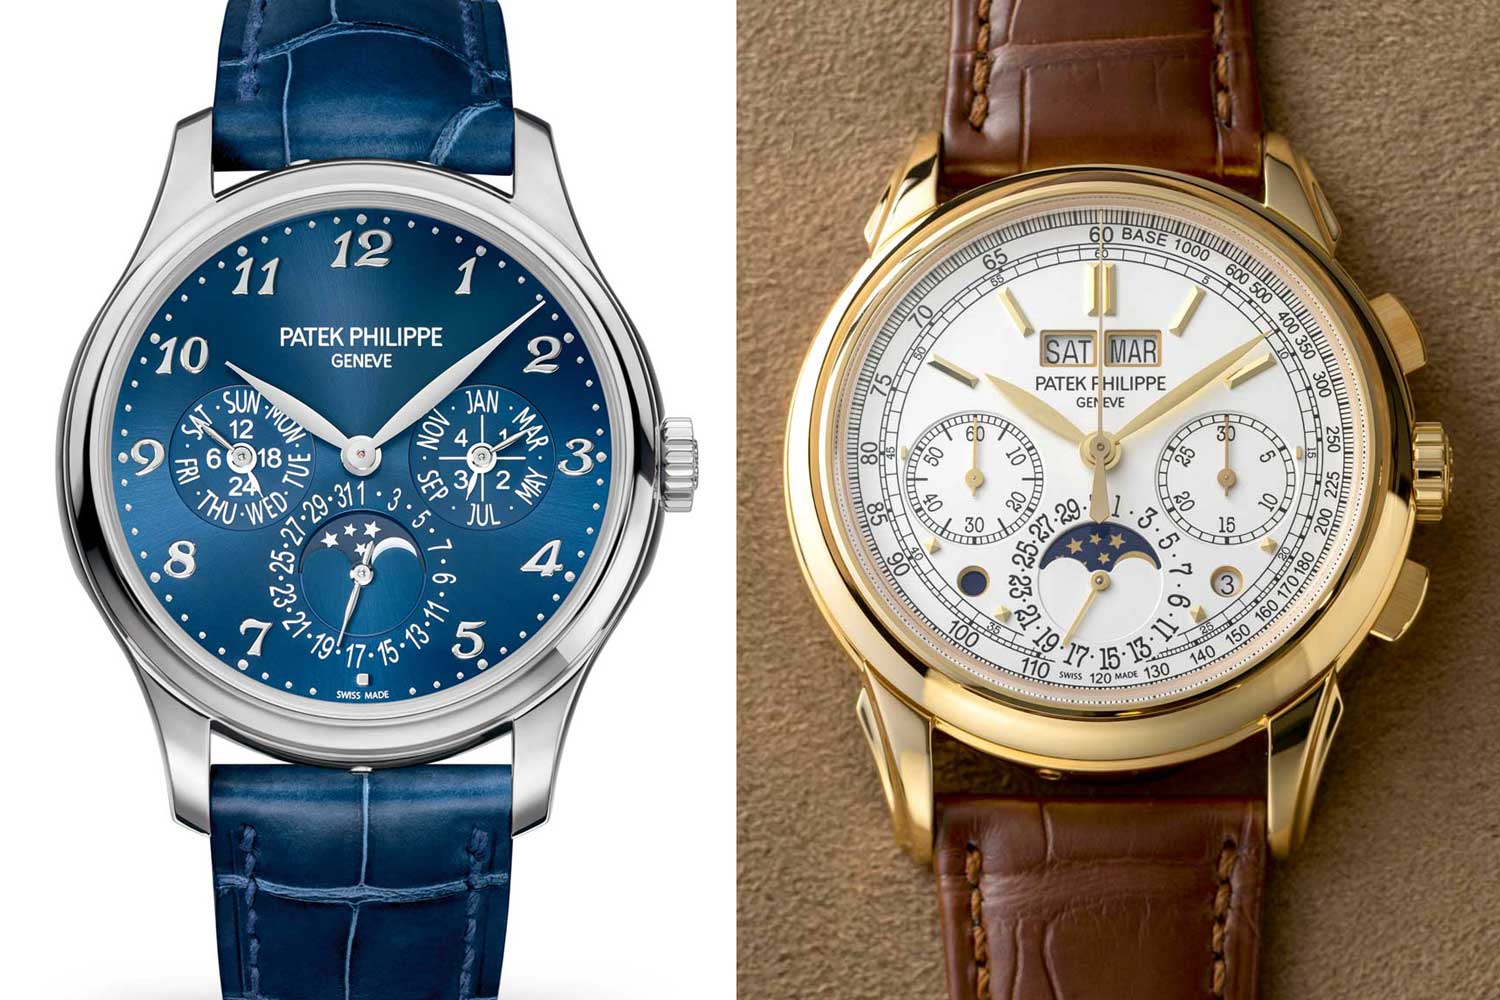 Patek Philippe Perpetual Calendar 5327G (left) and Perpetual Calendar Chronograph 5270J (right). As a rule of thumb, all Patek Philippe’s perpetual calendars with triple counters employ a 48-month cam while other configurations rely on a 12-month cam (Image: ©Revolution)